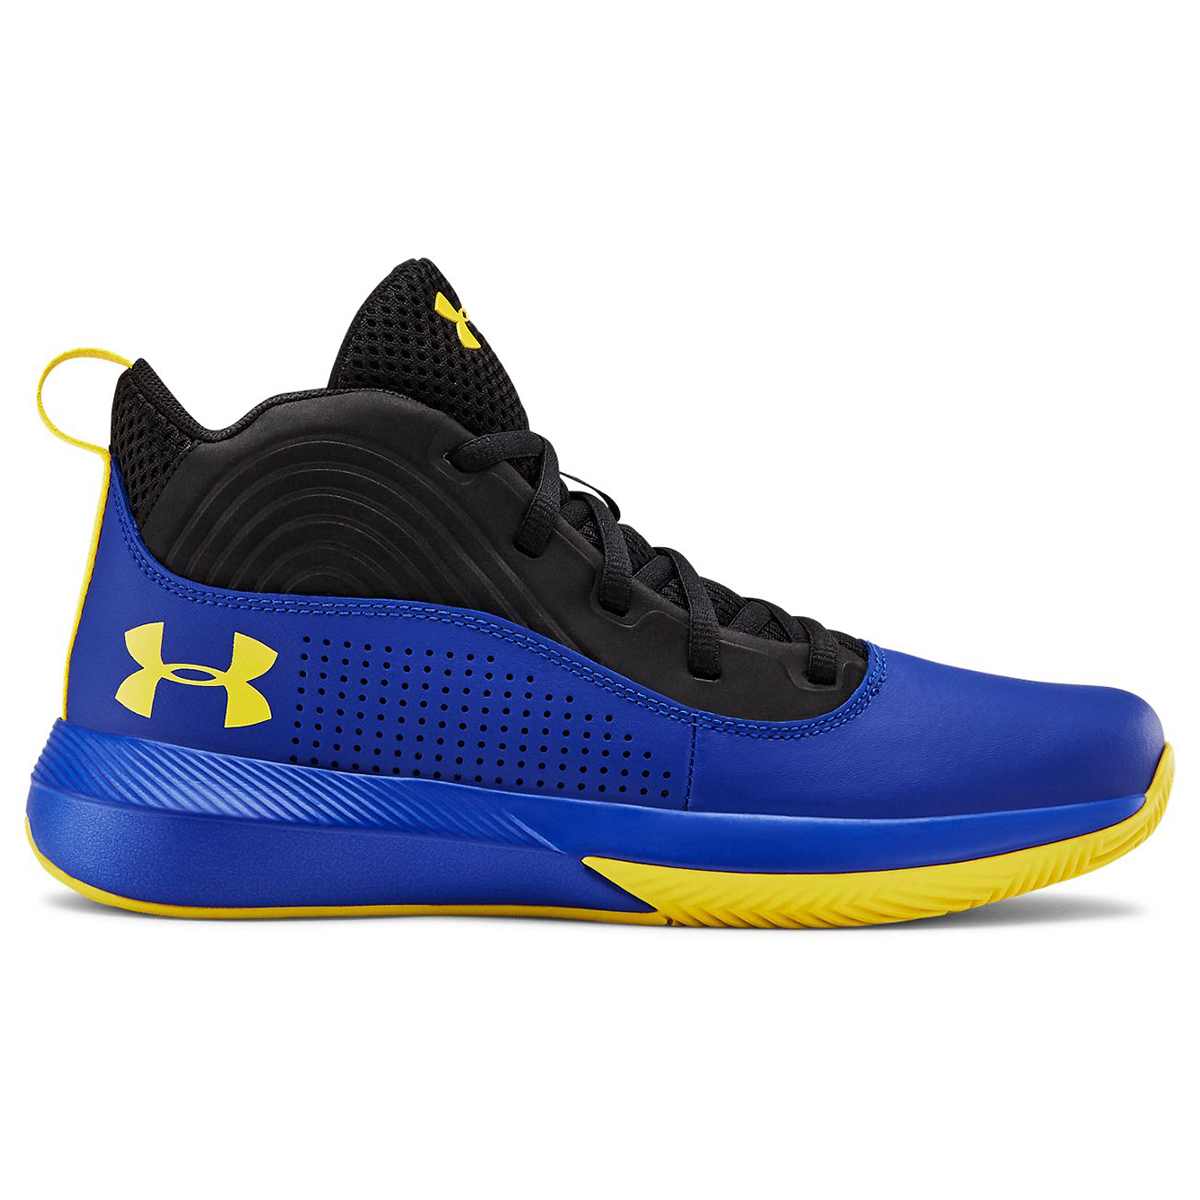 Under Armour Boys' Lockdown 4 Gs Basketball Shoes